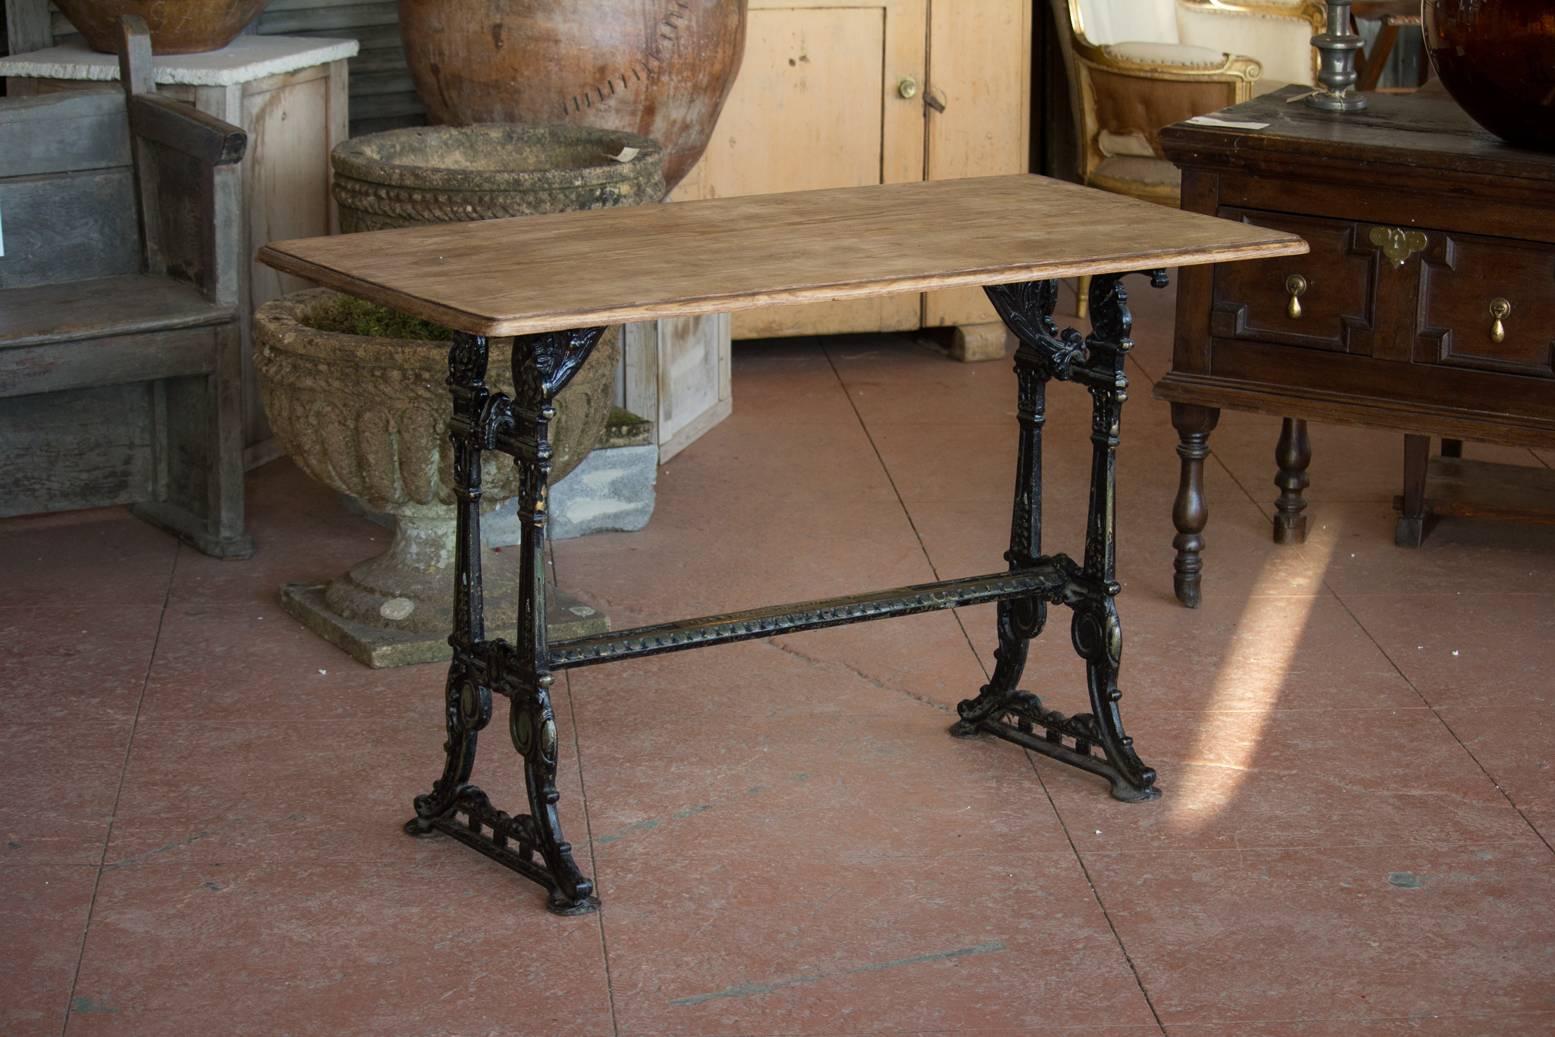 Early 20th century cast iron base pub or garden table with a hardwood top. This table was designed by British makers Lawn & Howarth of Manchester. Beautiful quality base and color.